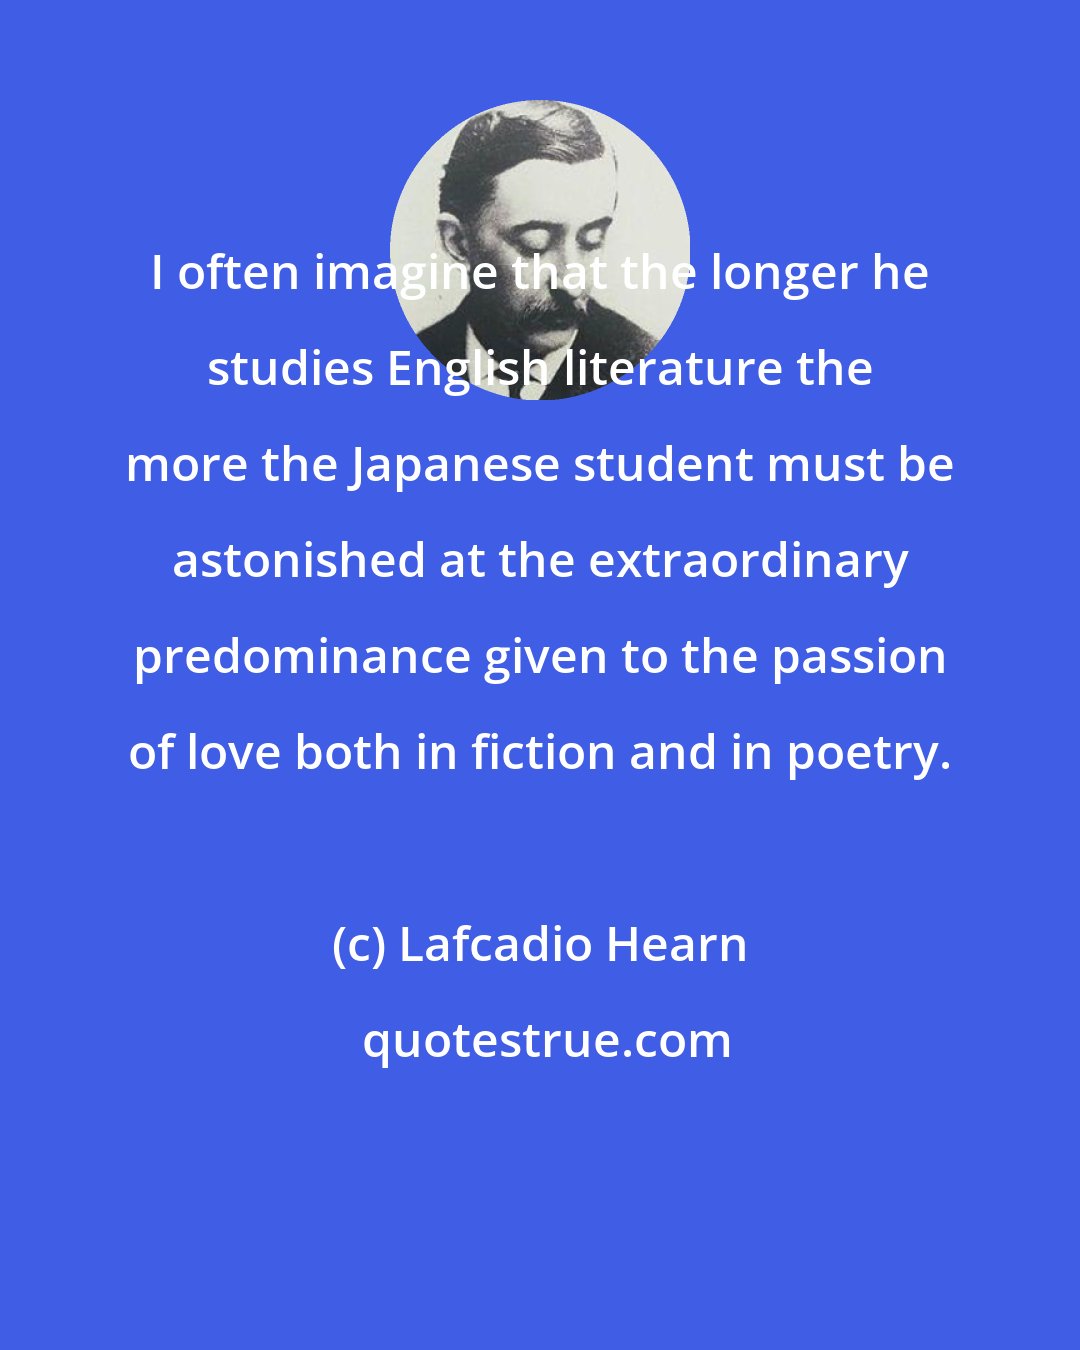 Lafcadio Hearn: I often imagine that the longer he studies English literature the more the Japanese student must be astonished at the extraordinary predominance given to the passion of love both in fiction and in poetry.